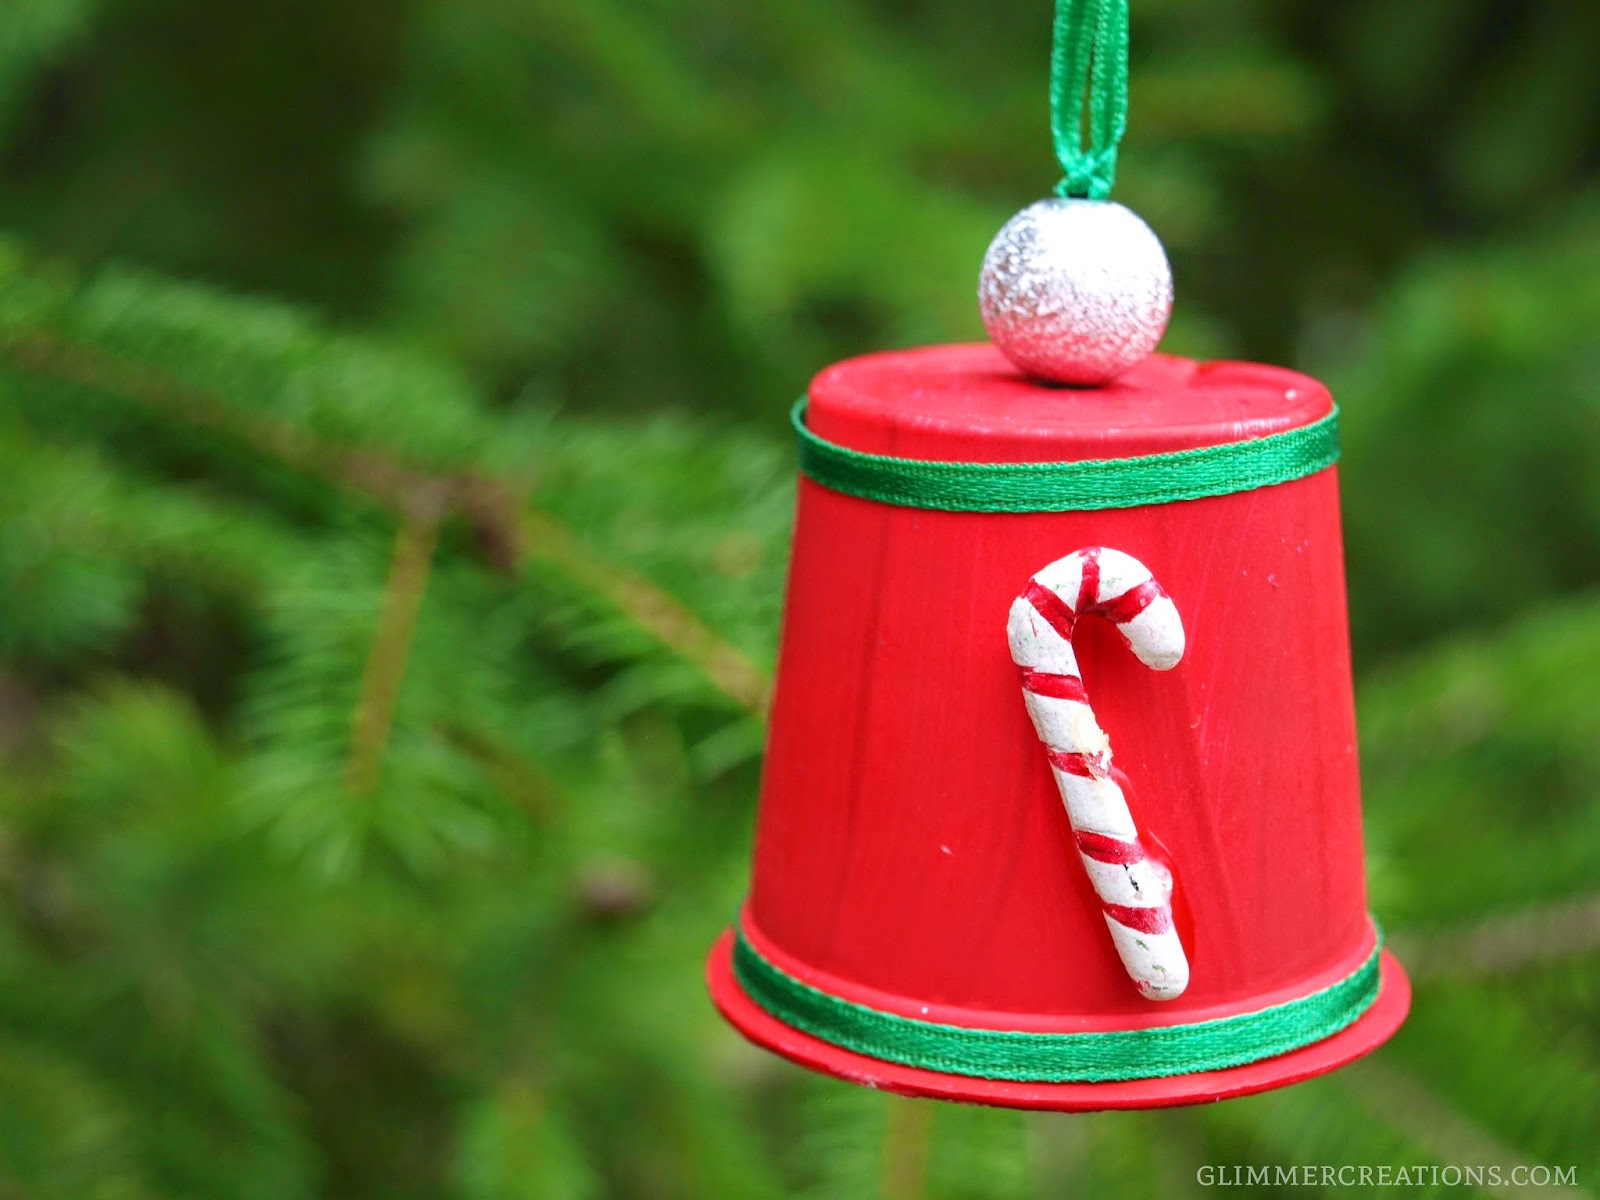 Glimmer Creations: Recycled Single-Serve Coffee Maker Cup Christmas Bell Ornament Tutorial.